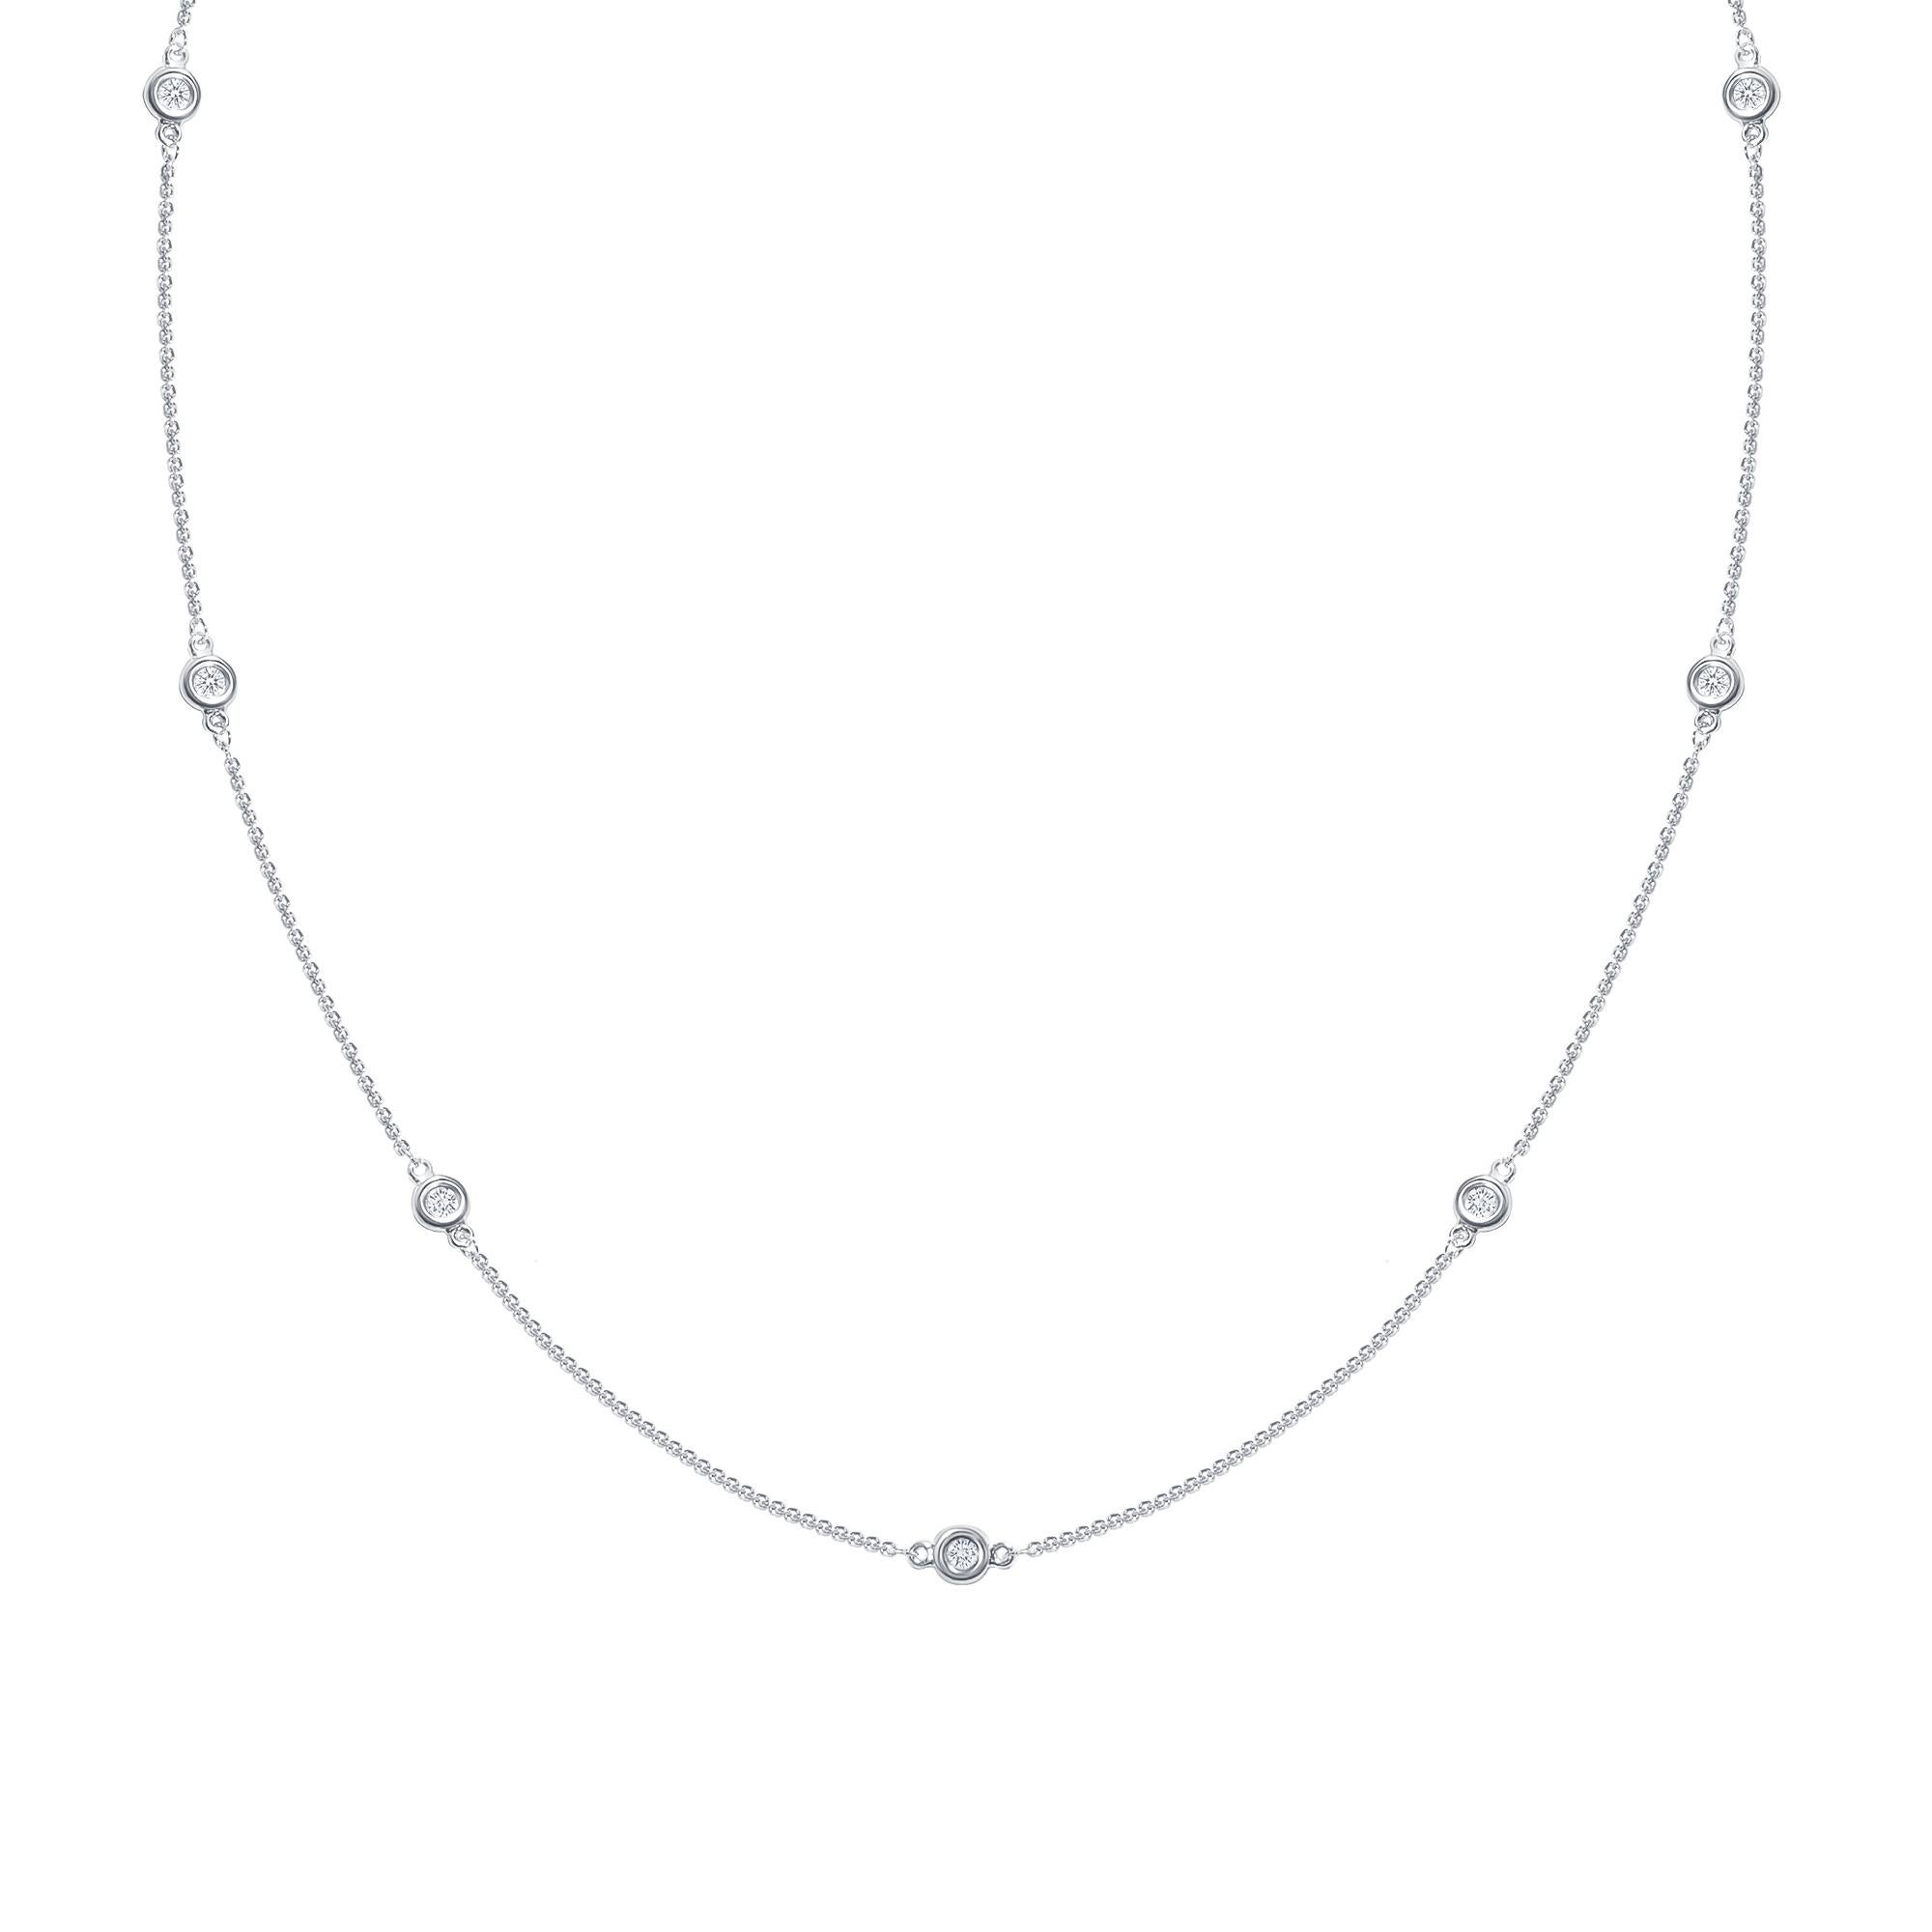 Eight elegant round diamonds set in a bezel setting along a 14k gold chain necklace.

Gold: 14K Gold
Number of Diamonds: Eight
Gold Color: White Gold
Carat: 0.50 Carats
Necklace Length: 22 Inches
Diamond Clarity: VS
Diamond Color: F
Chain Type: